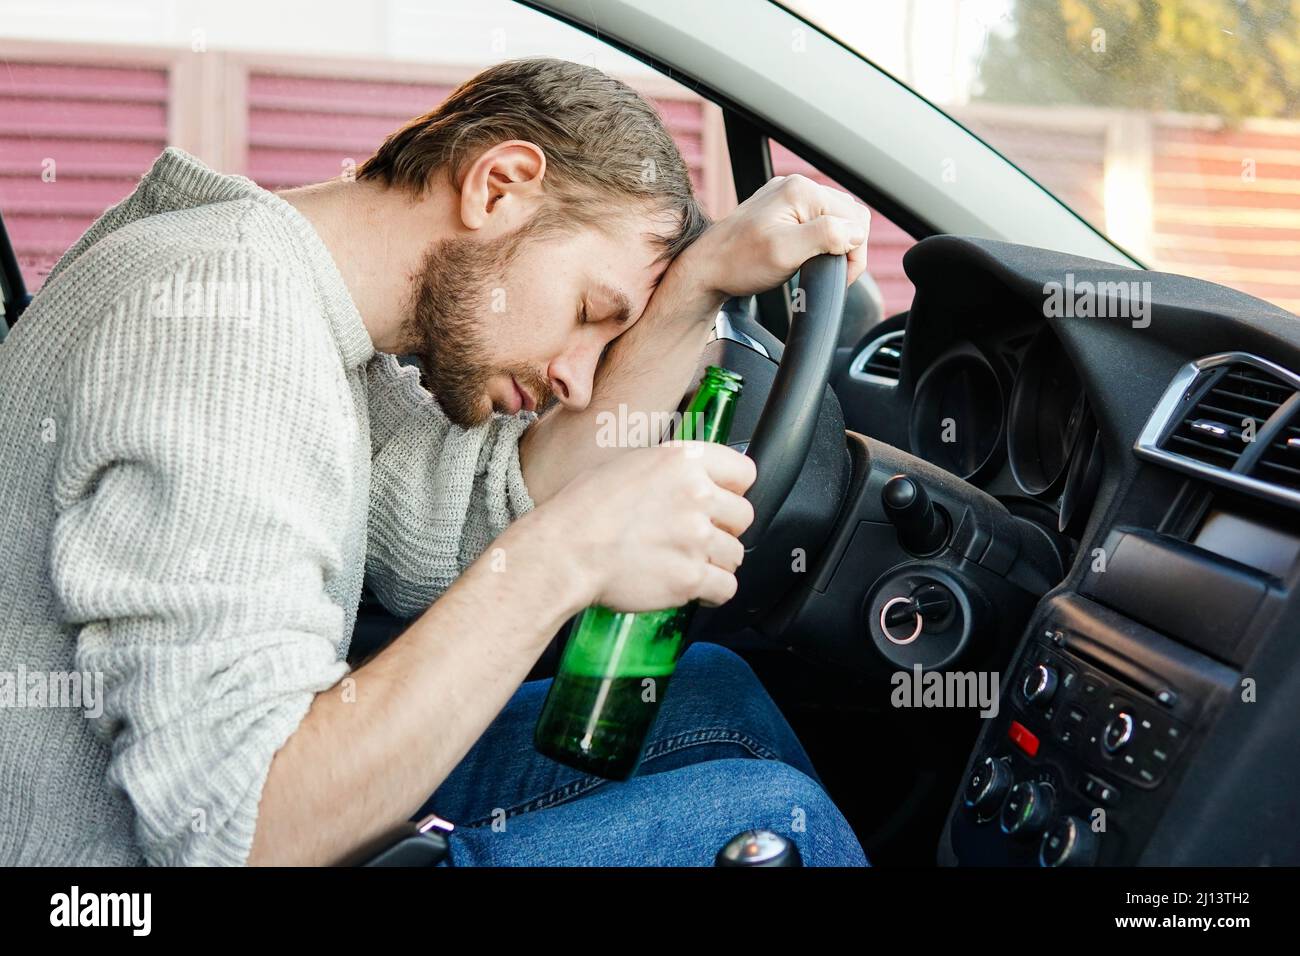 Young drunk man fall asleep behind the wheel of a car. Male car driver holding bottle of beer. Stock Photo